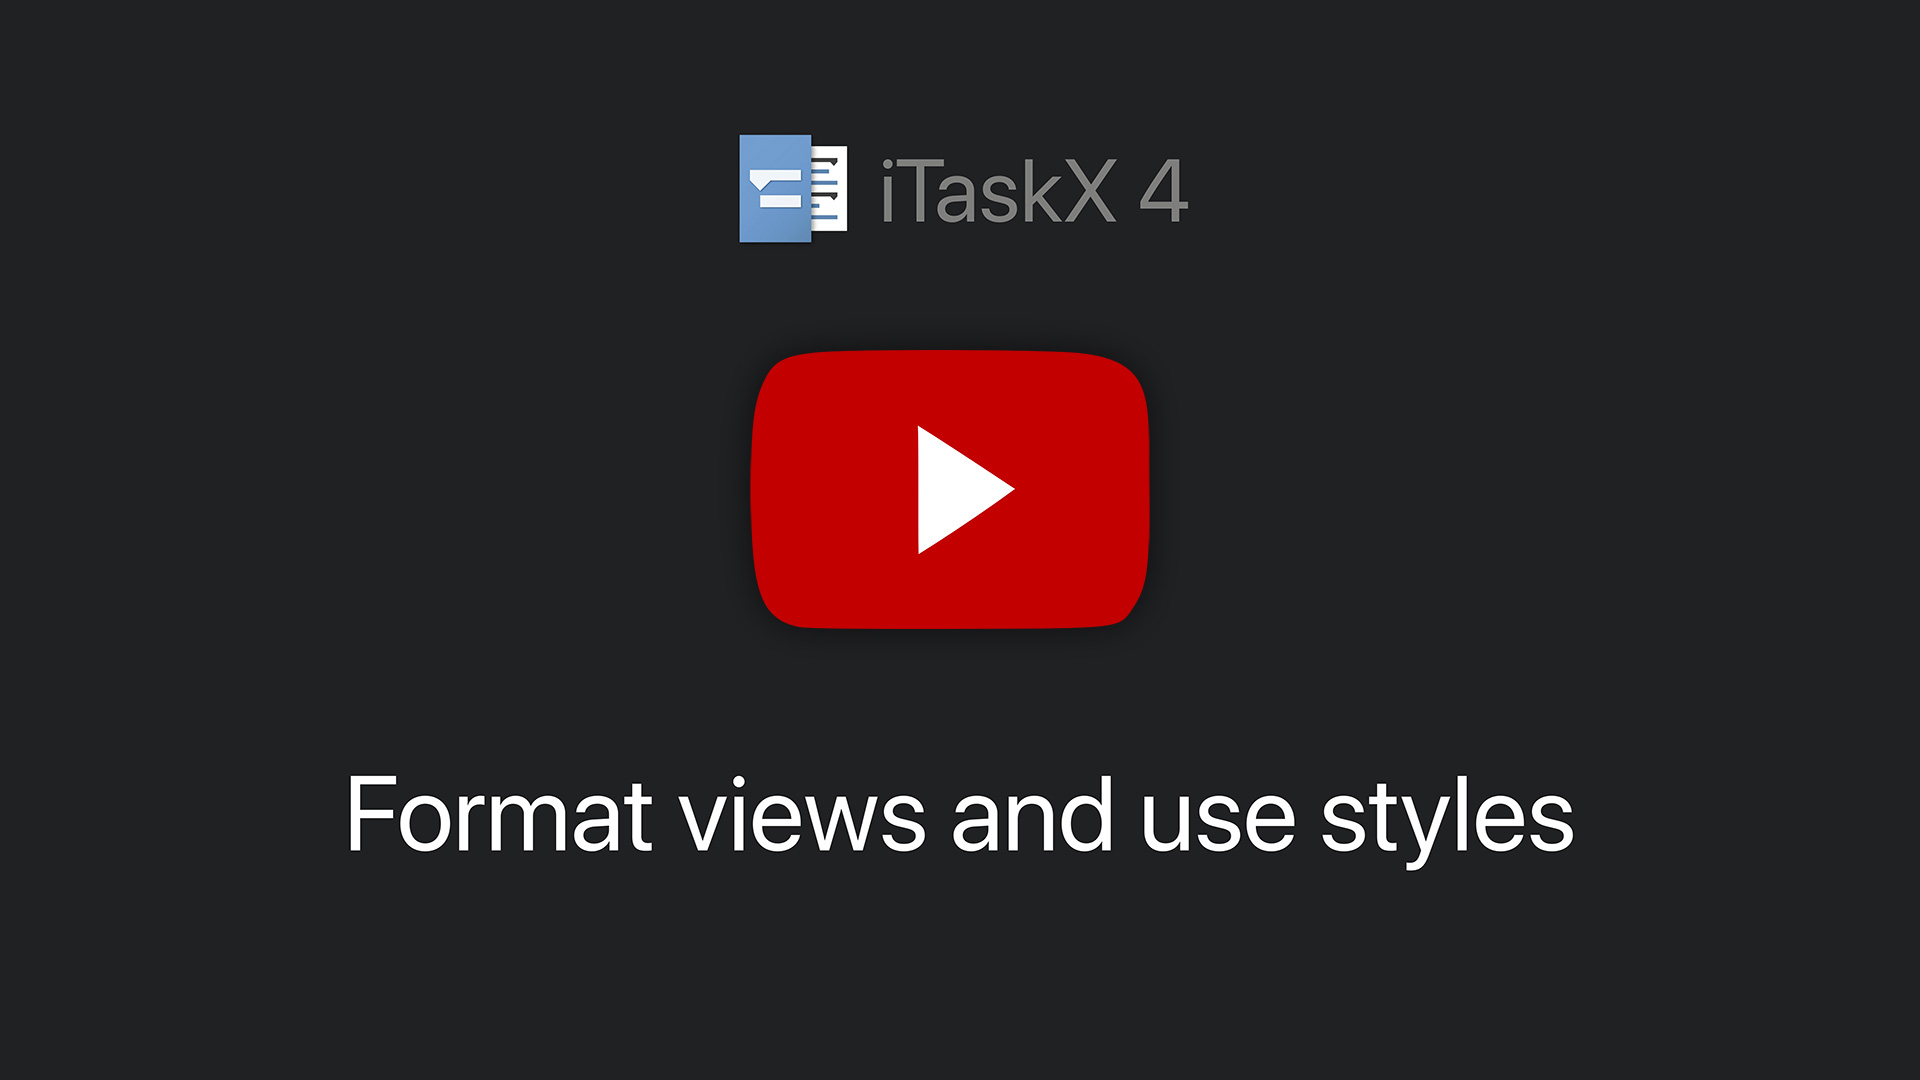 Format views and use styles in iTaskX 4